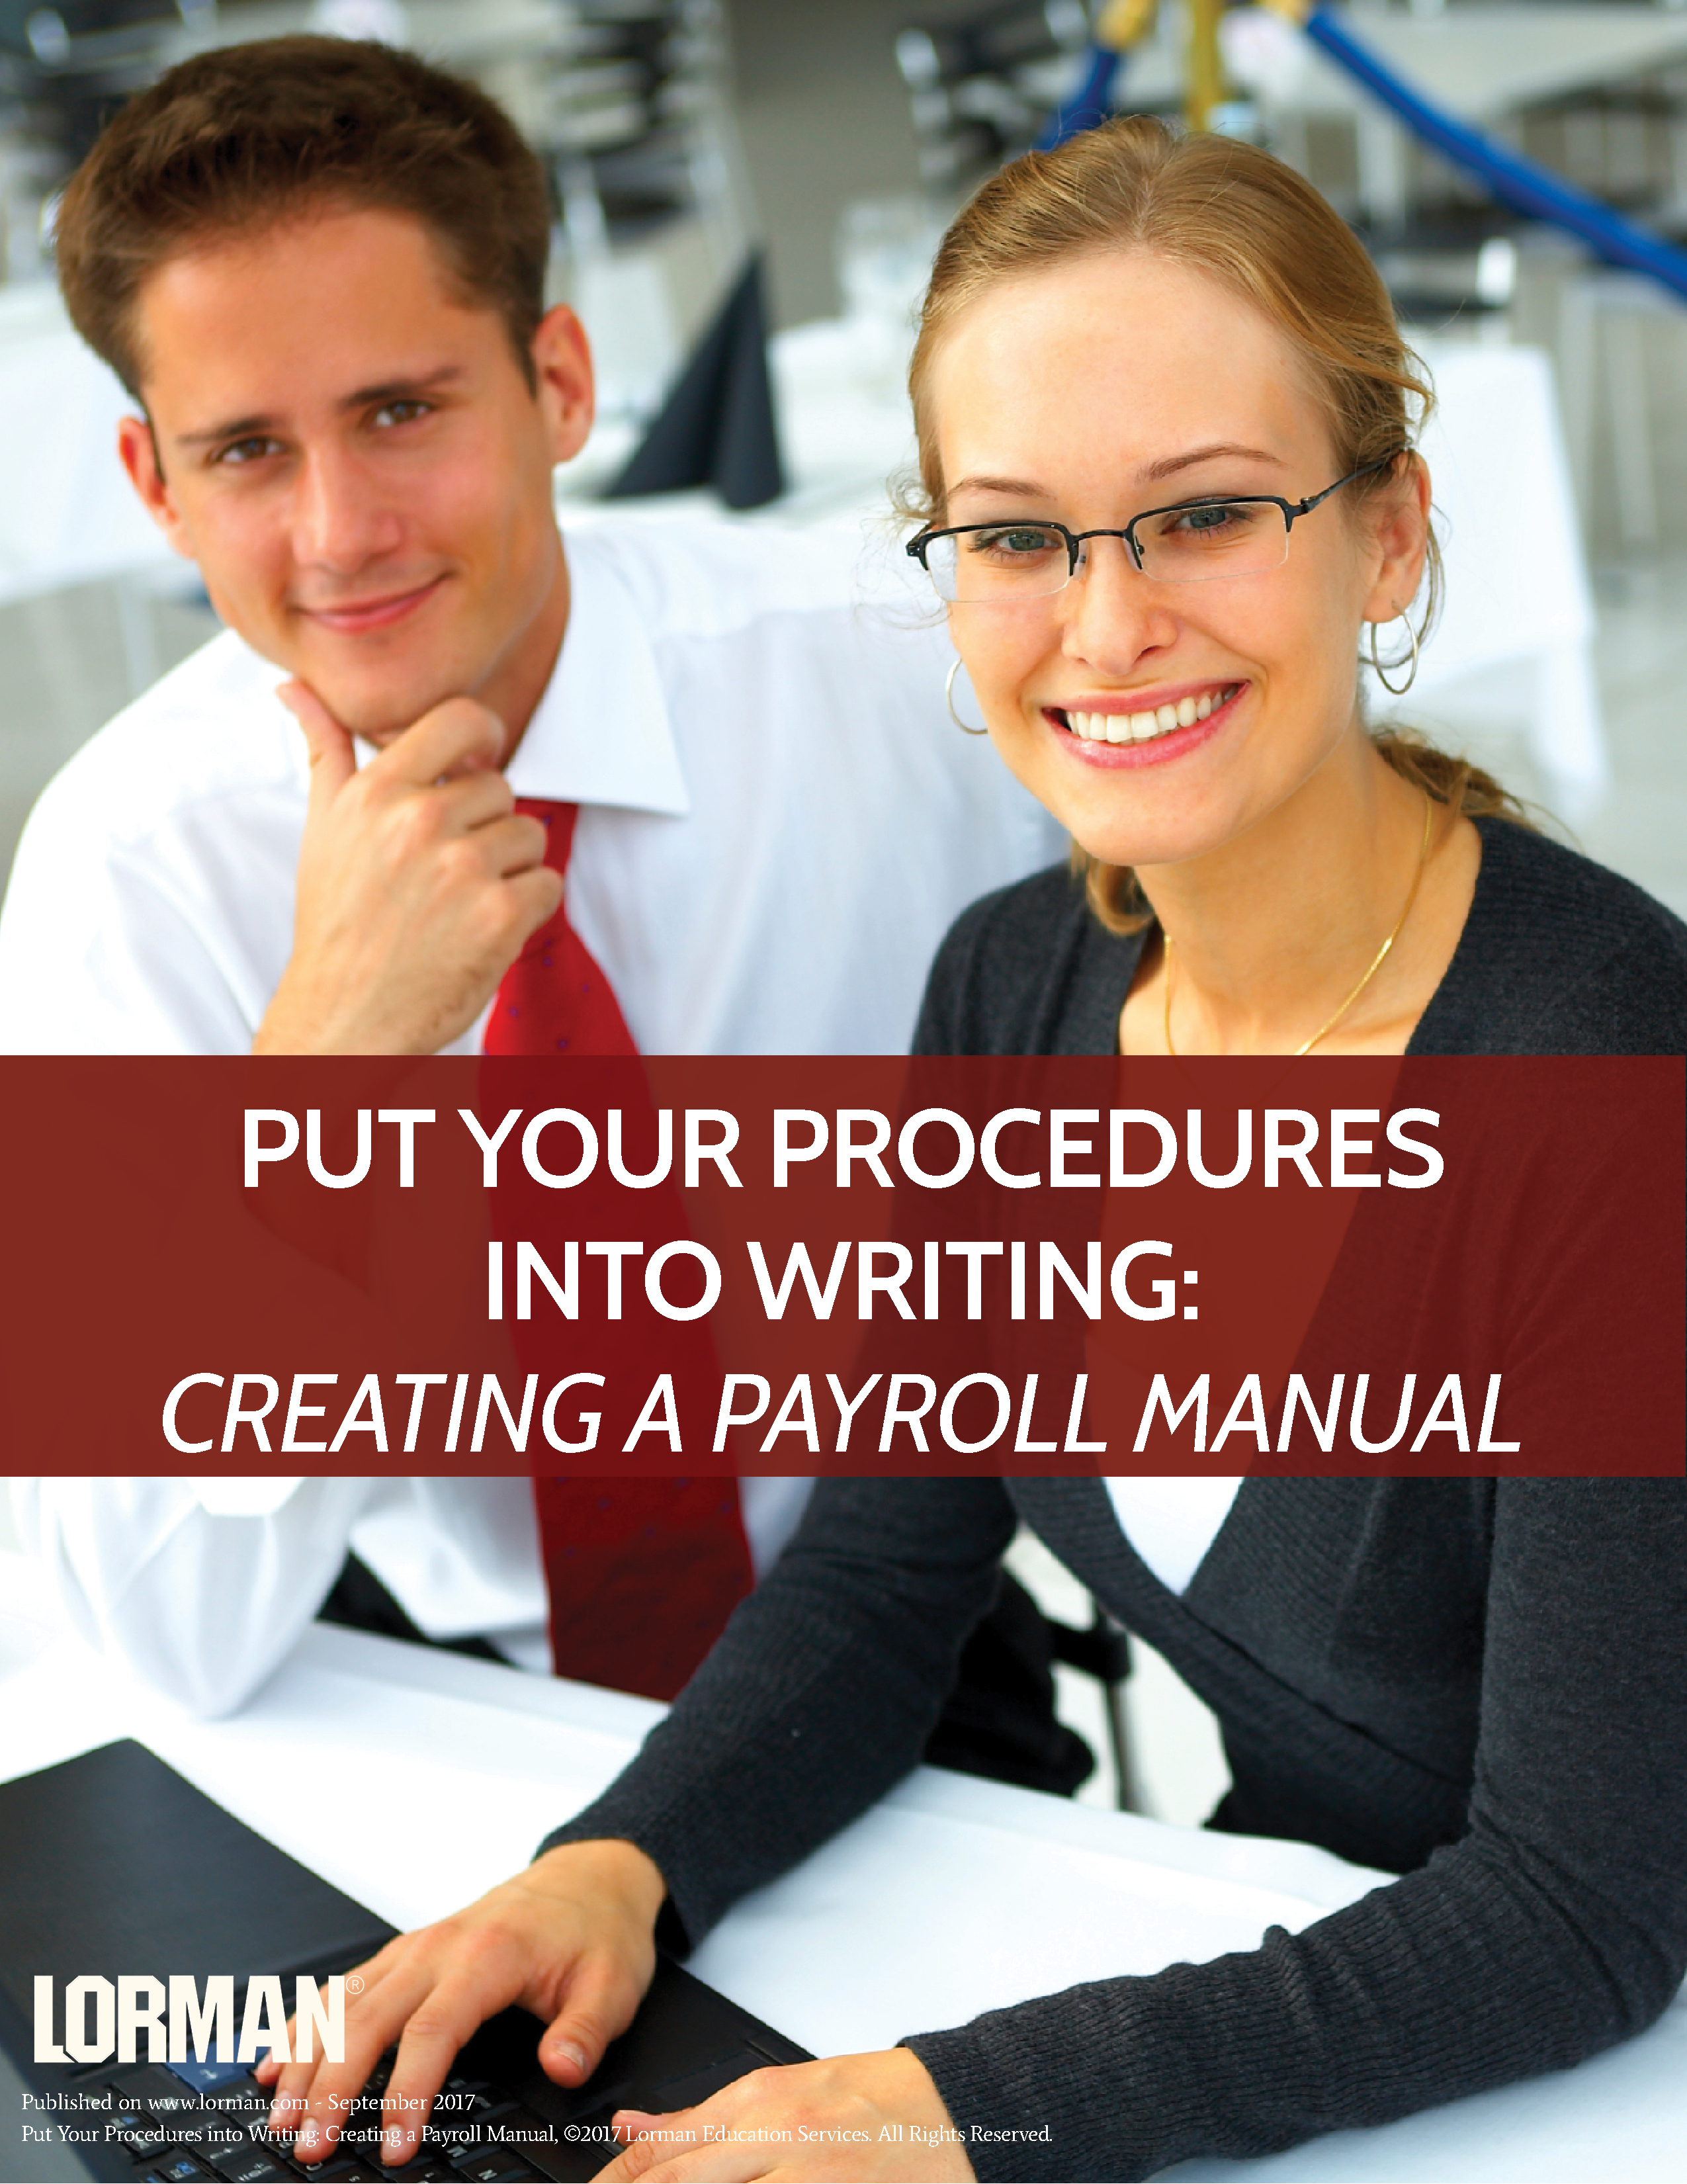 Put Your Procedures into Writing: Creating a Payroll Manual